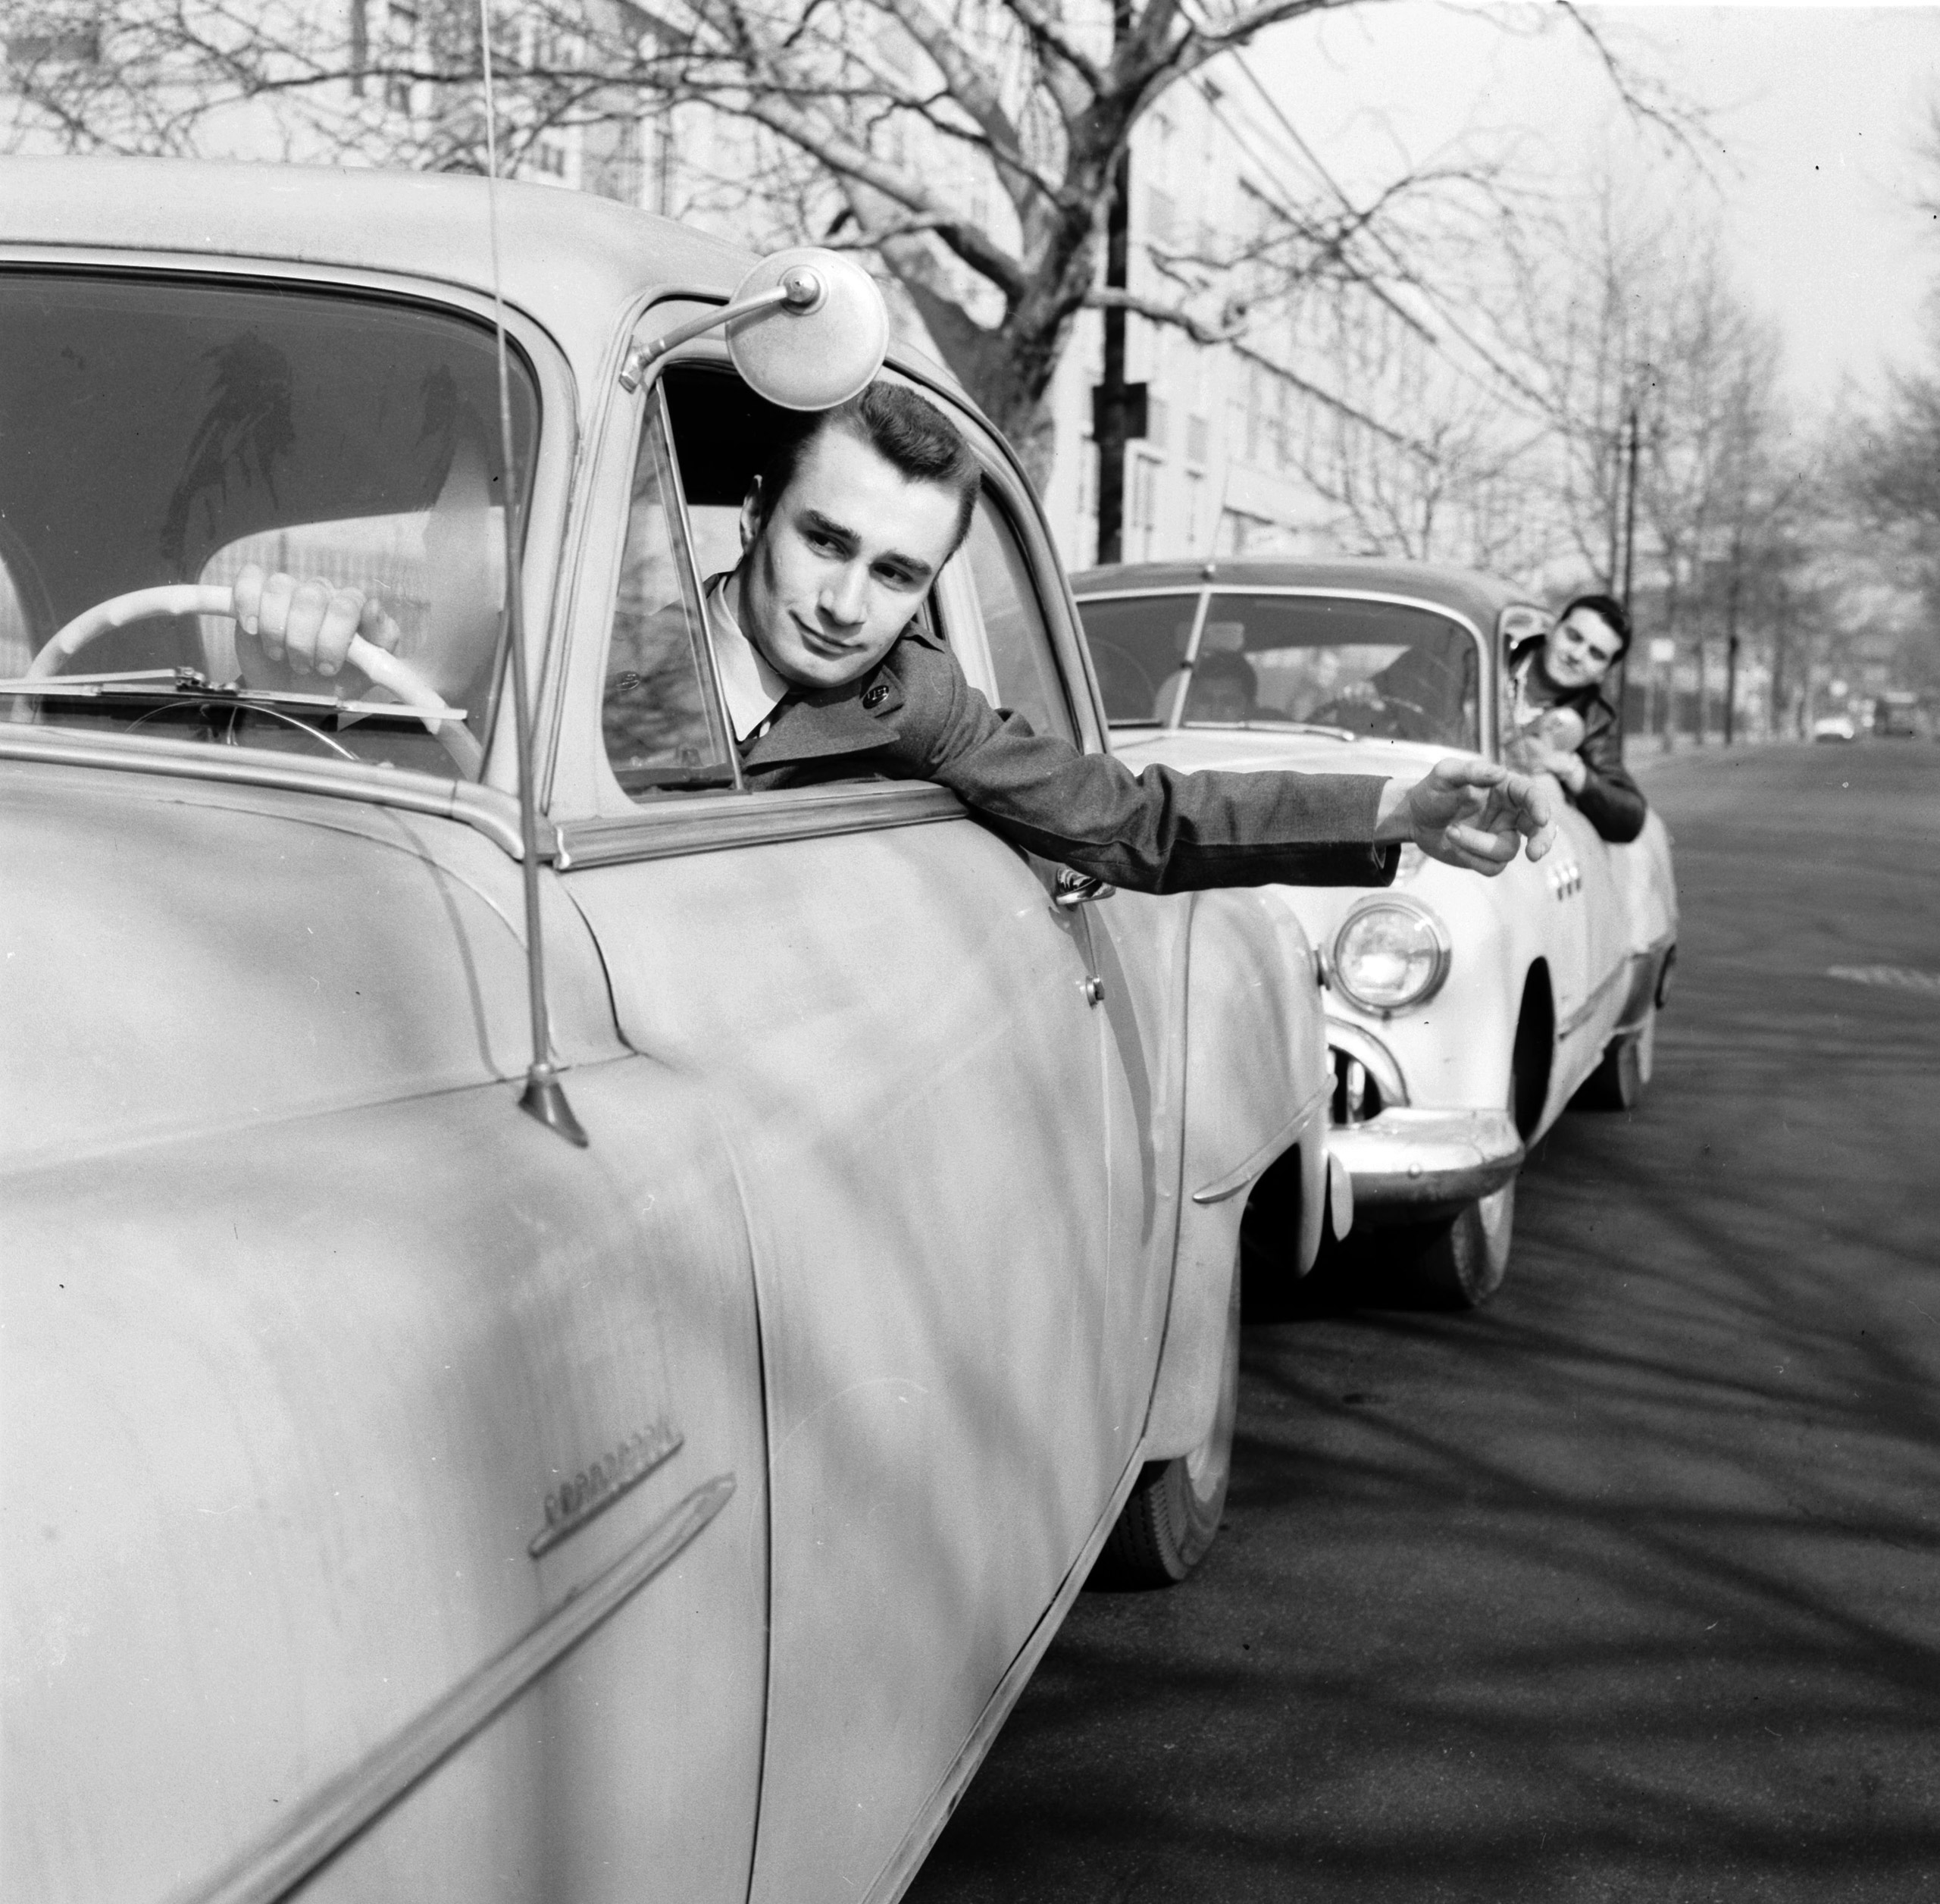 Students at Brooklyn School of Automotive Trades and members of the Automotive Custom Crafters Club are pledged to provide honest service to the motoring public without charge. Here they give a driver a push start, 1956.